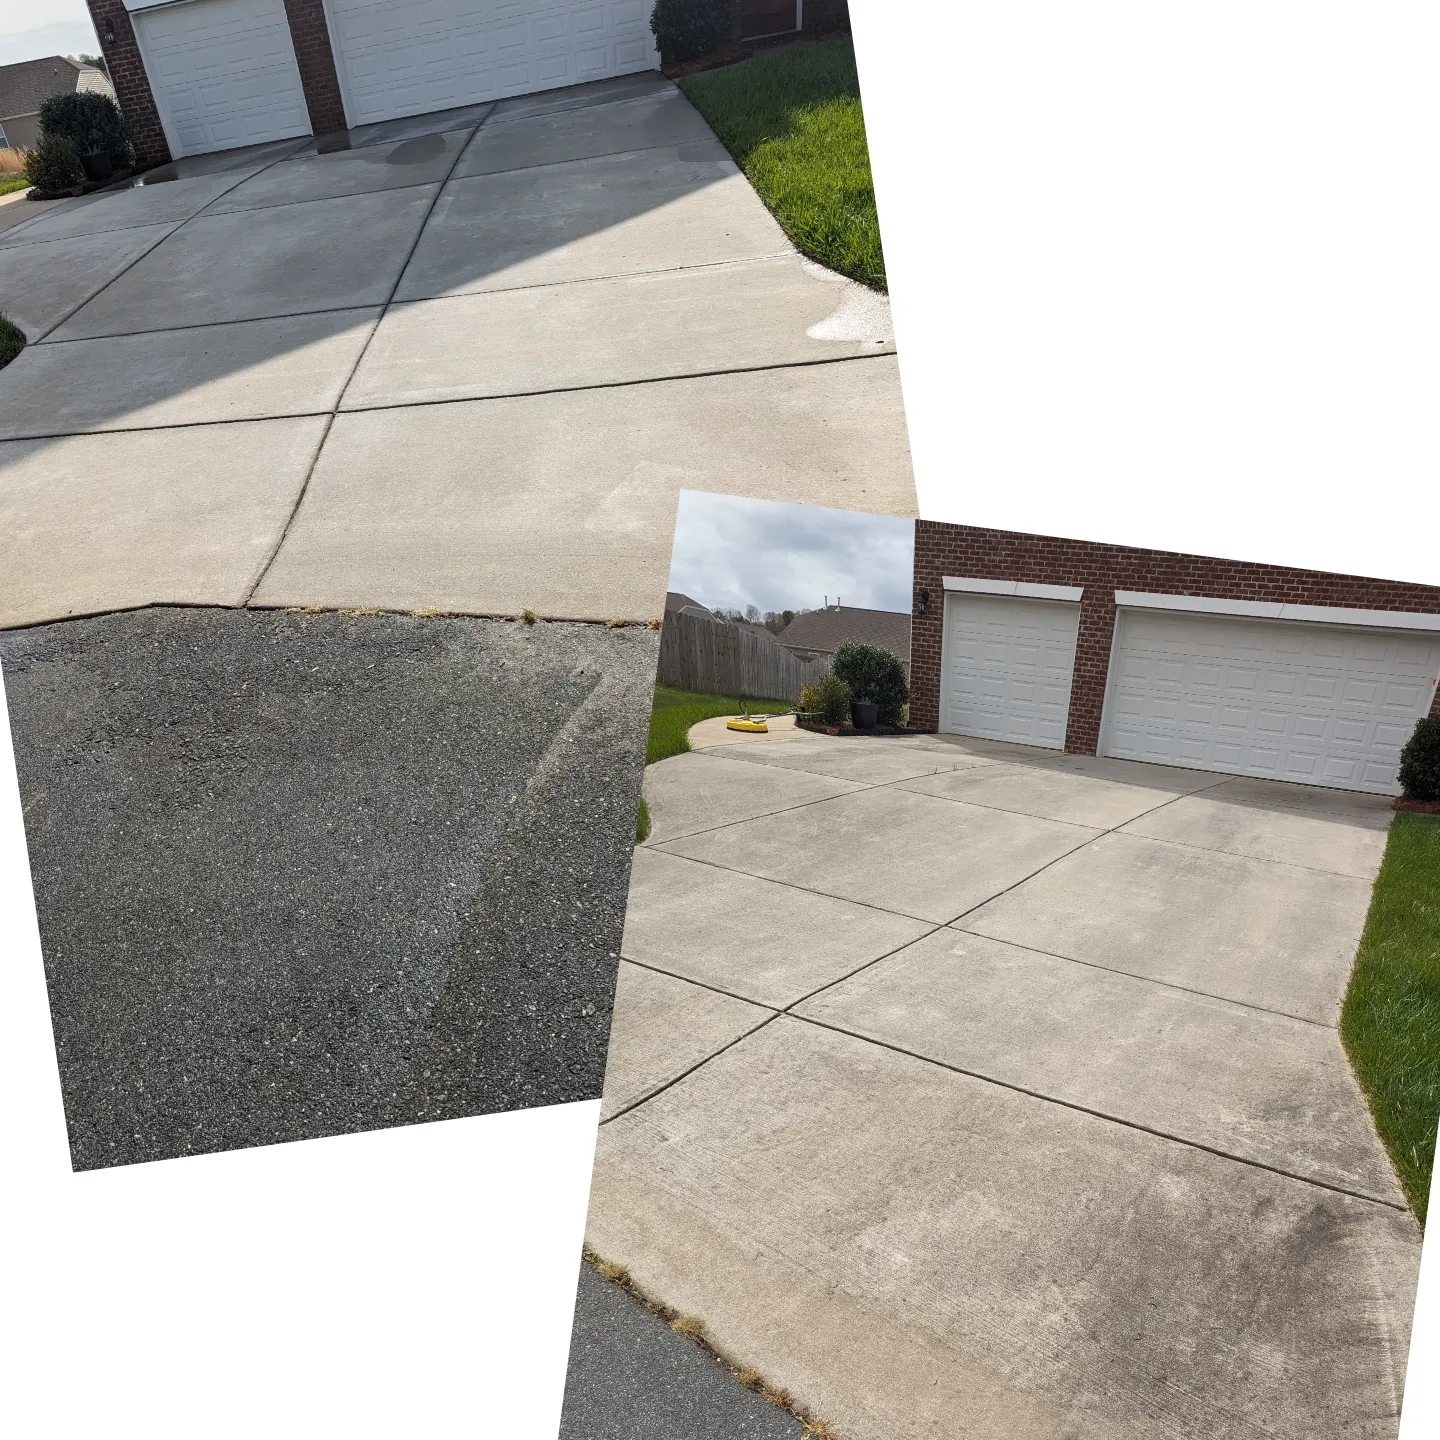 Top Quality Driveway and Patio Cleaning in Haw River NC